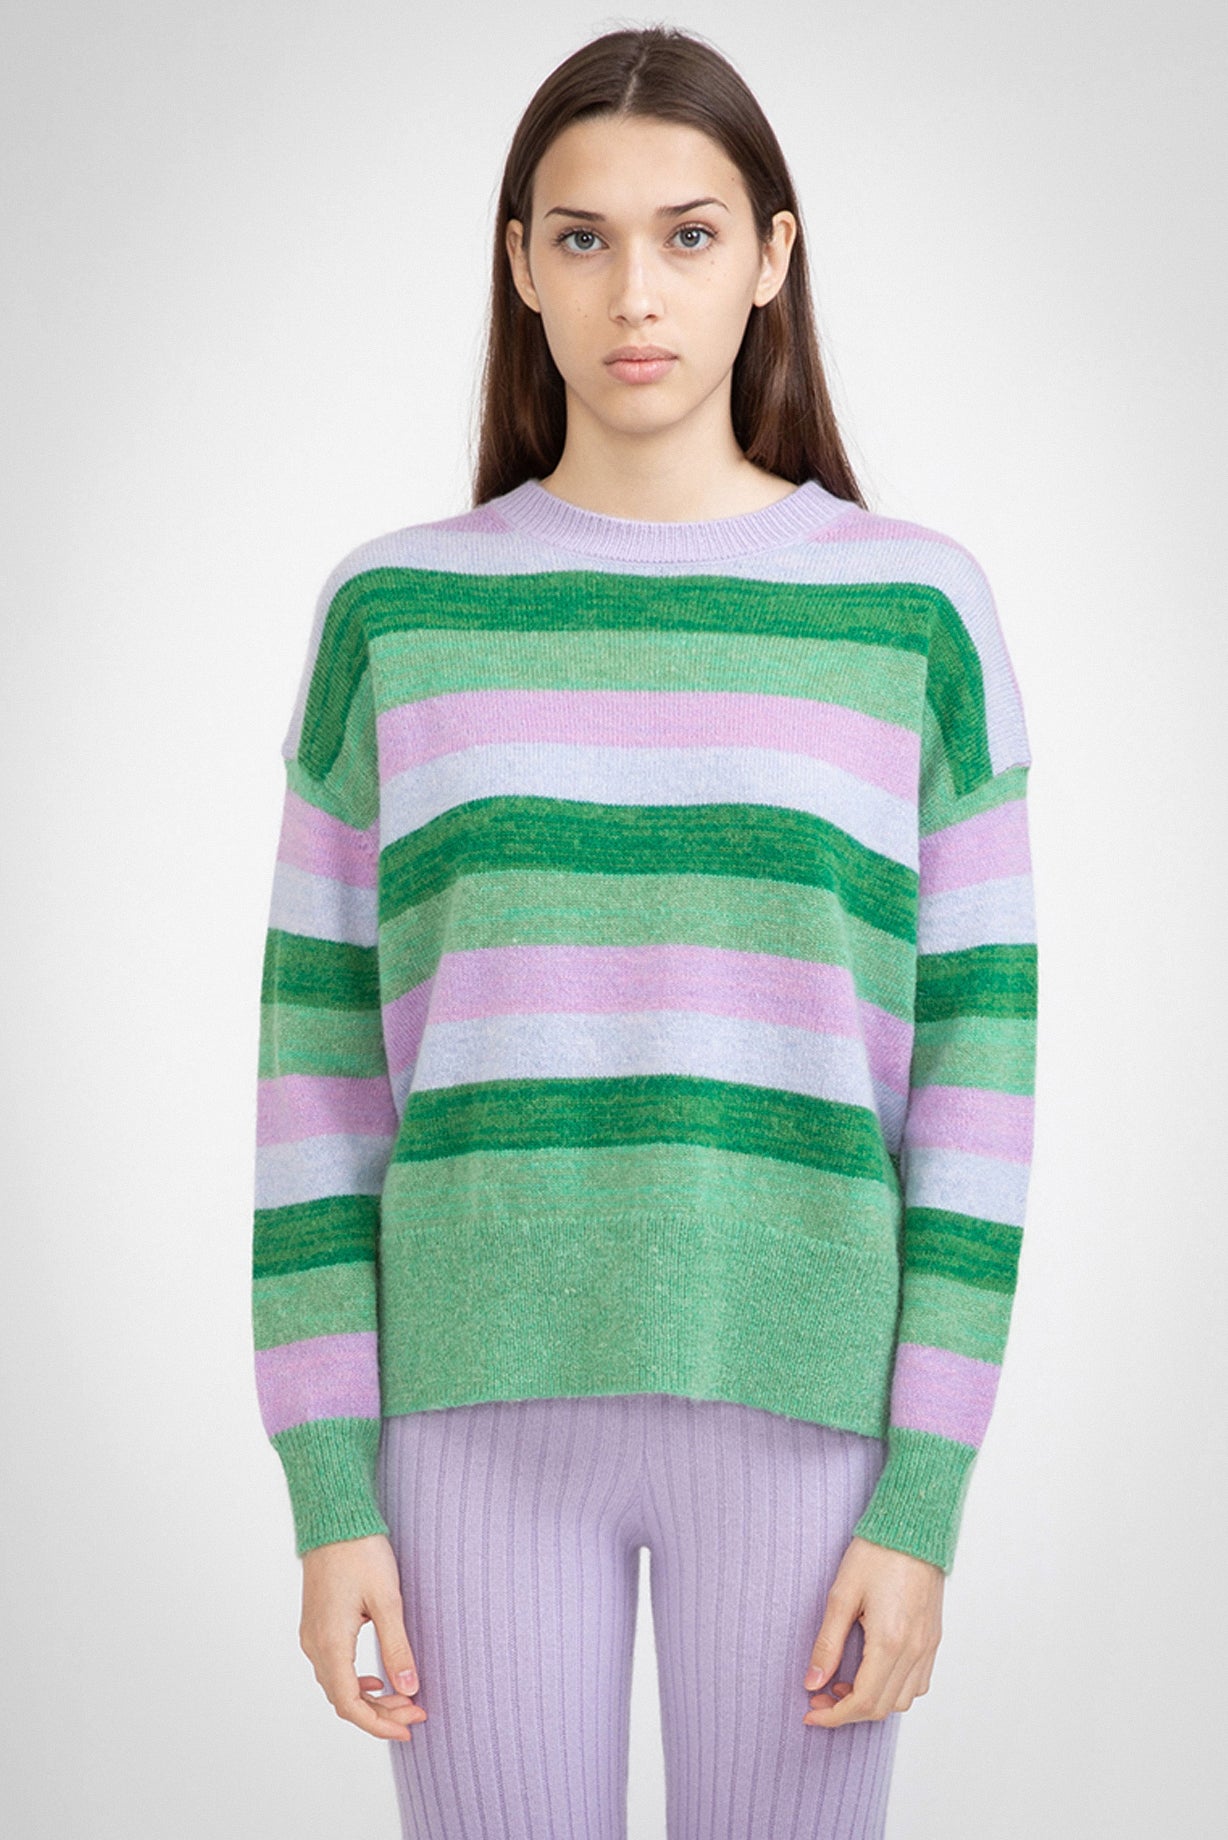 N.118 CASHMERE BLEND MULTI-STRIPE MOHAIR CREW - ABSENTHE - XS, S left